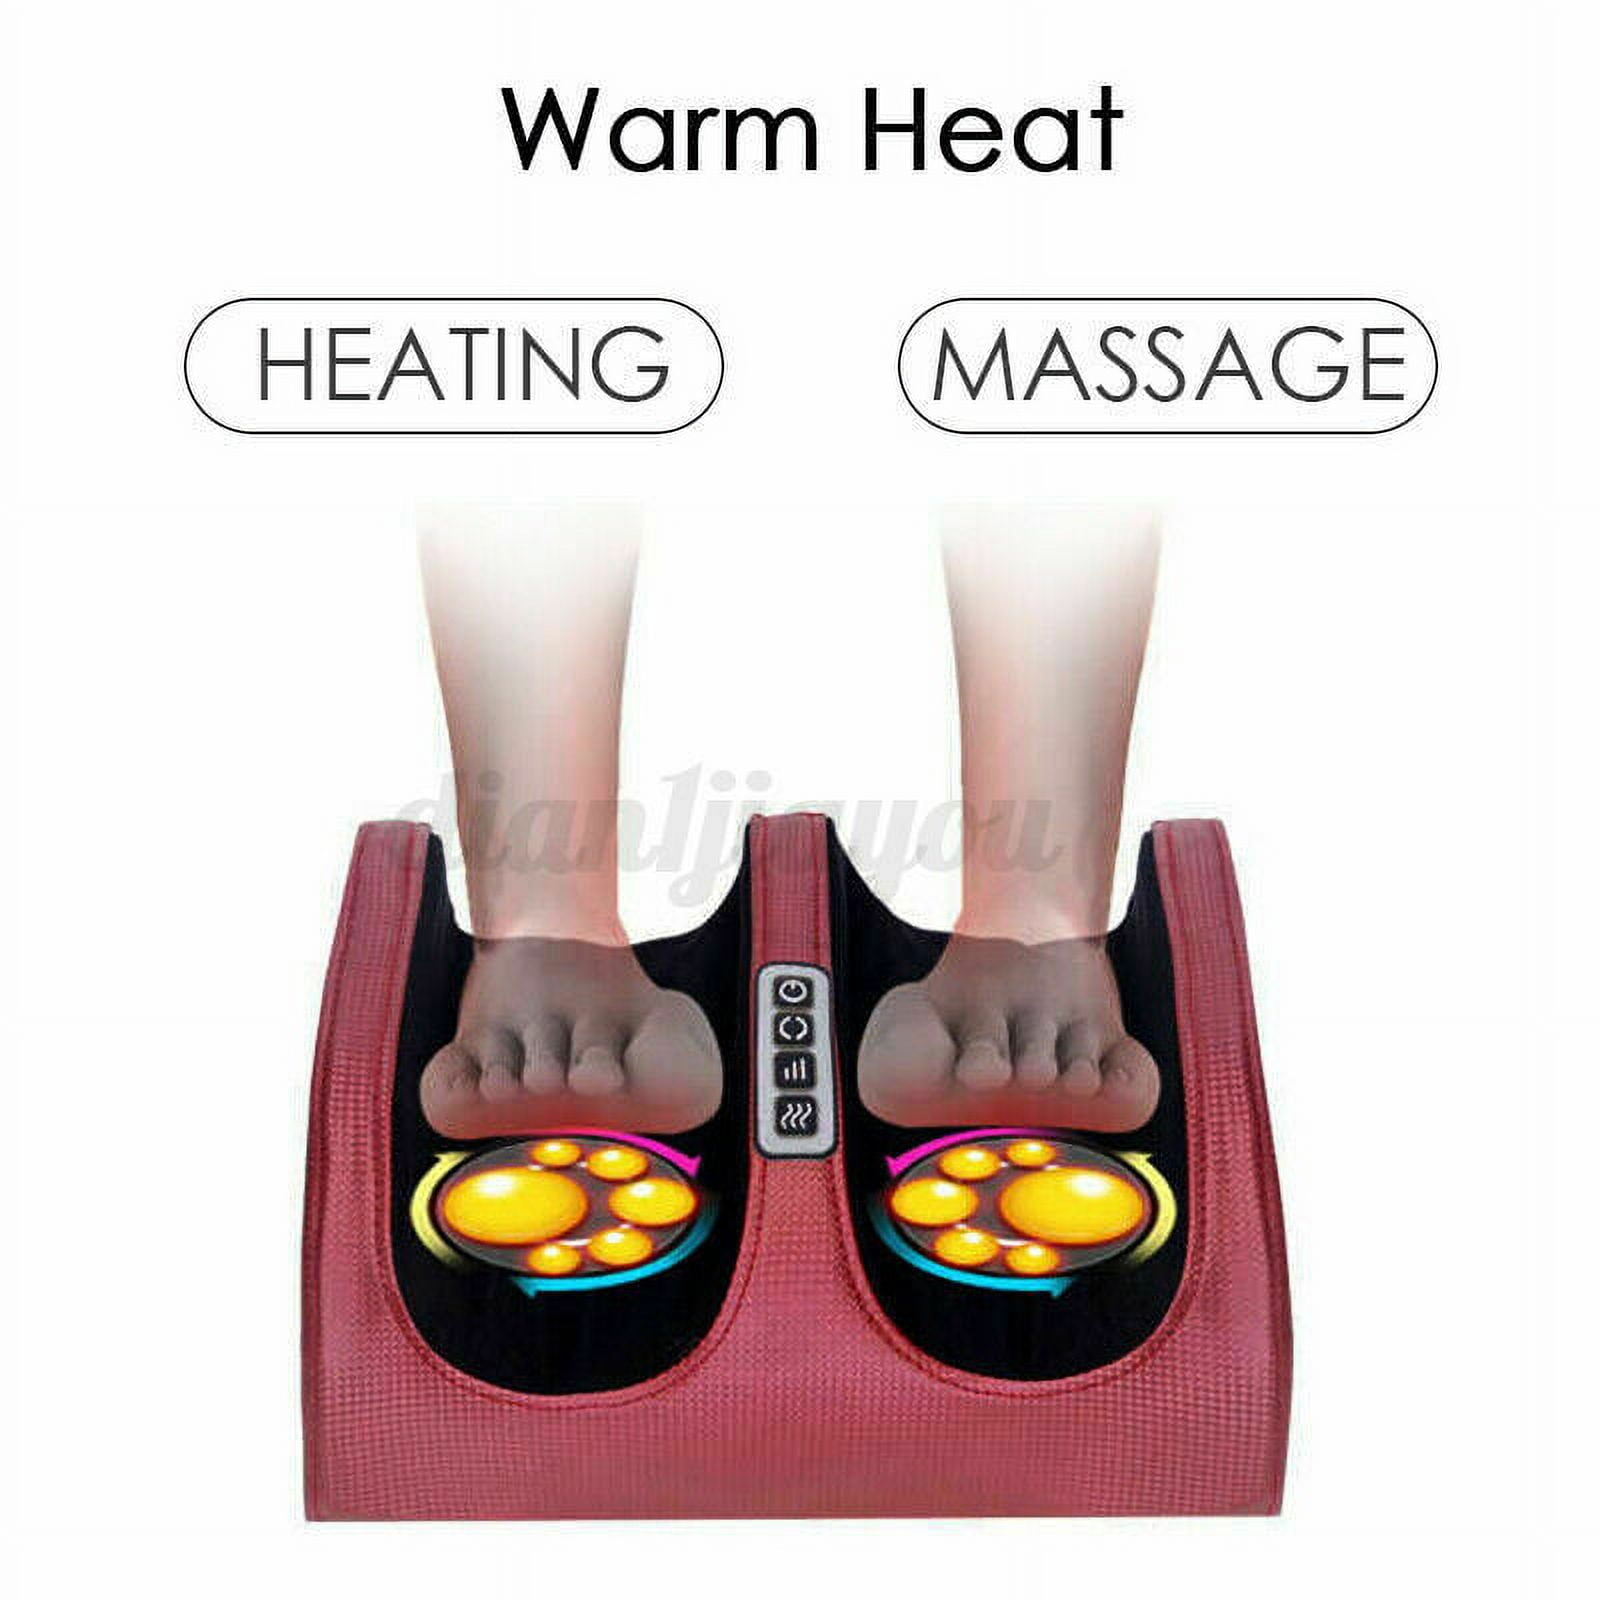 Nekteck Foot Massager with Heat, Shiatsu Heated Electric, Kneading Foot  Massager Machine for Planter Fasciitis, Built in Infrared Heat Function and  Power Cord 